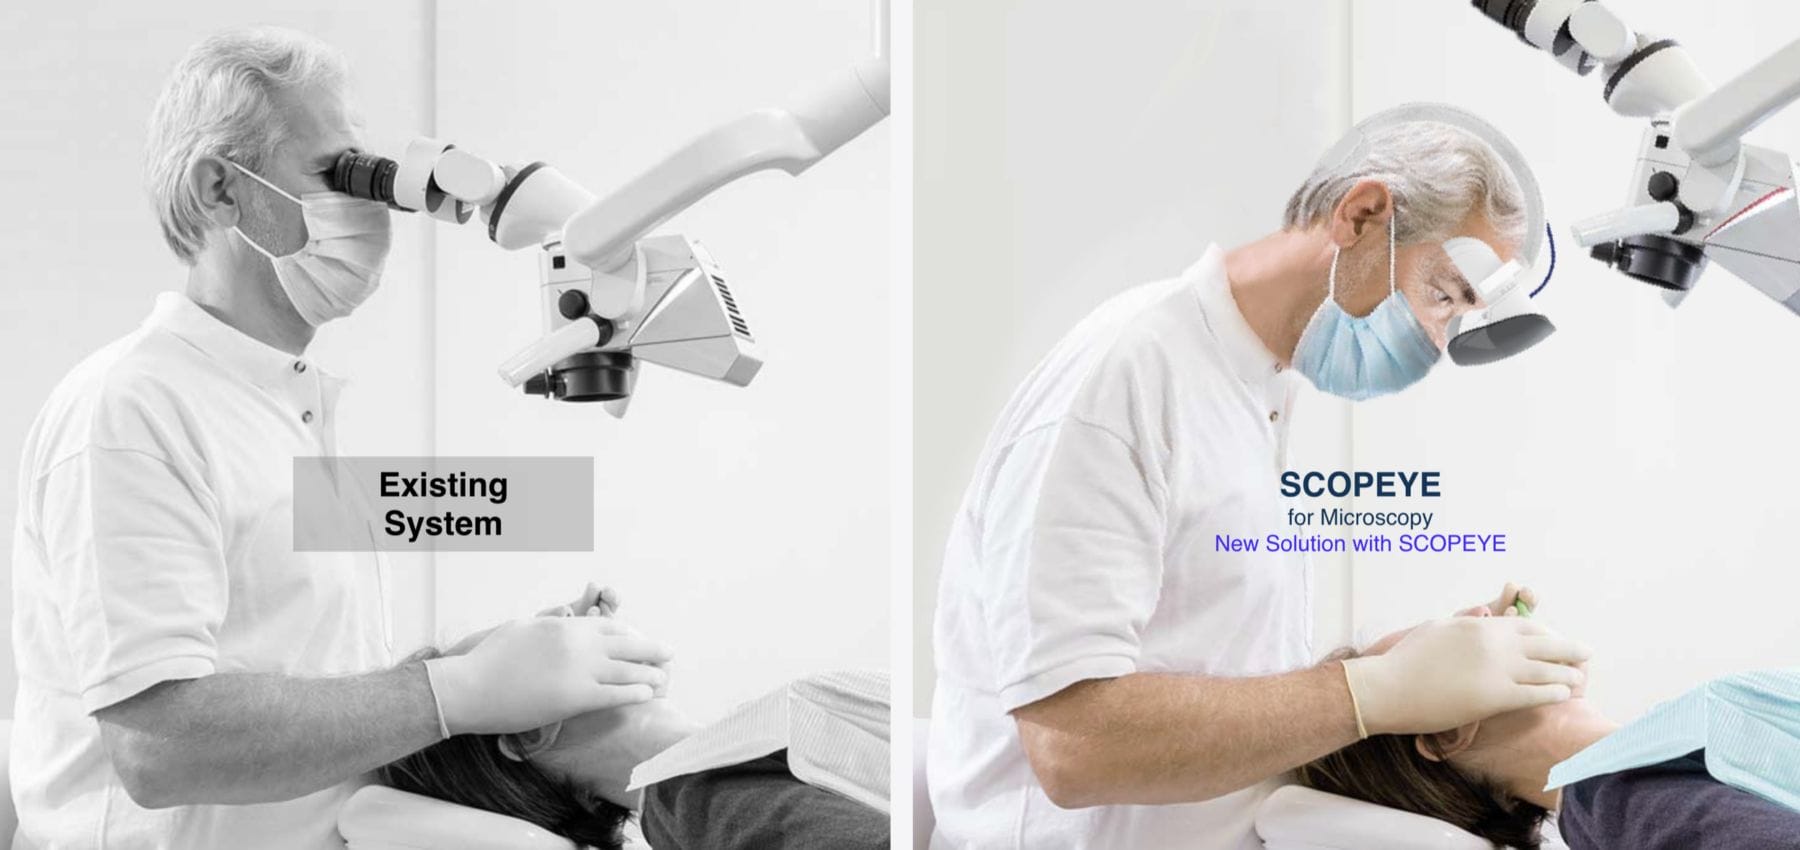 Alvica | Acupressure London | Back Pain London | Innovative Medical Device | Medical Technology Distribution and Retail | ScopeEye: Revolutionizing Microscopy with Innovative Technology Glasses for Enhanced Surgical Viewing